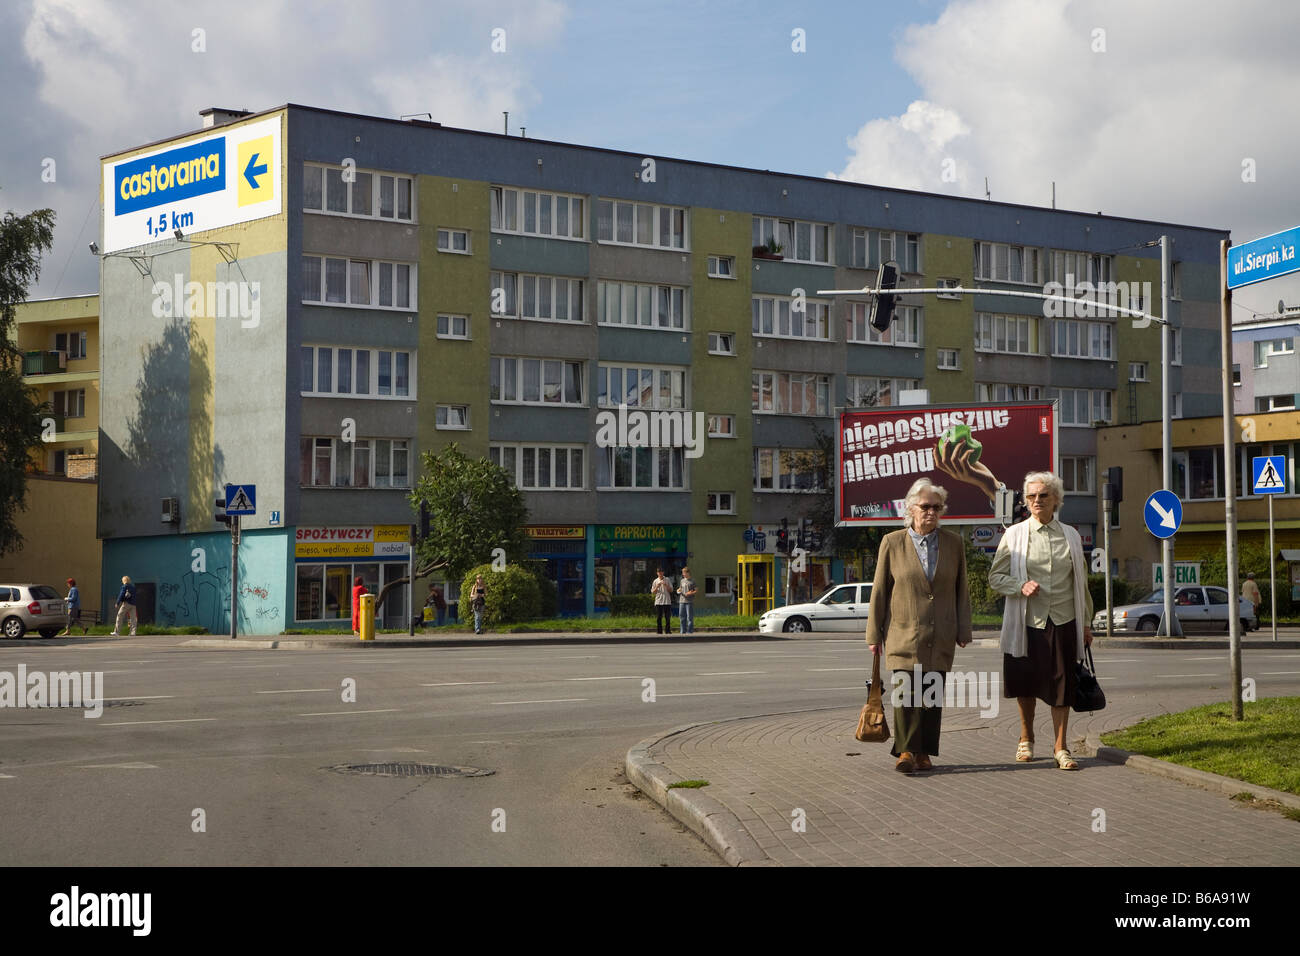 Women walking on street in town with concrete building and advertisements in background Slupsk Poland Stock Photo